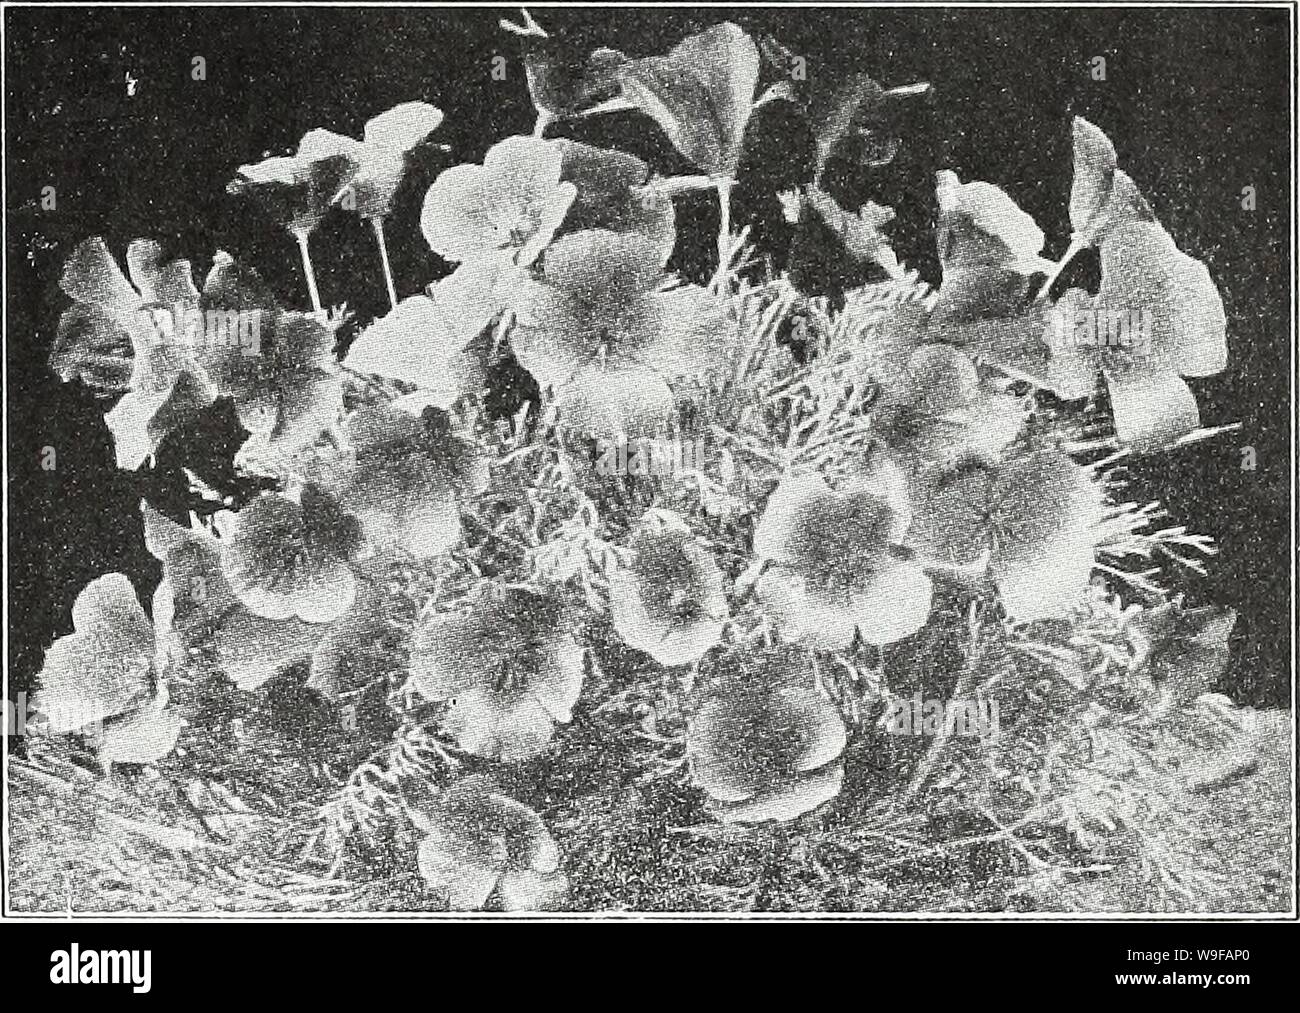 Archive image from page 26 of Currie's garden annual  spring,. Currie's garden annual : spring, 1935 60th year  curriesgardenann19curr 1 Year: 1935 ( CURRIE BROTHERS CO., MILWAUKEE, WIS. Page 23 ESCHSCHOLTZIA CALIFORNIA POPPY â Showing free, flowering annuals of dwarf spreading hab- it. The seed should be sown in the open ground where wanted, as they do not transplant well. Crimson KingâBright crimson, inside sat- iny carmine. Vi oz., 65c Pkt. 10c Golden WestâBright yellow with deep orange blotches at the base. V4, oz., 25c Pkt. 10c LovelyâRose pink suffused salmon Pkt. 10c Orange FlameâVivid Stock Photo